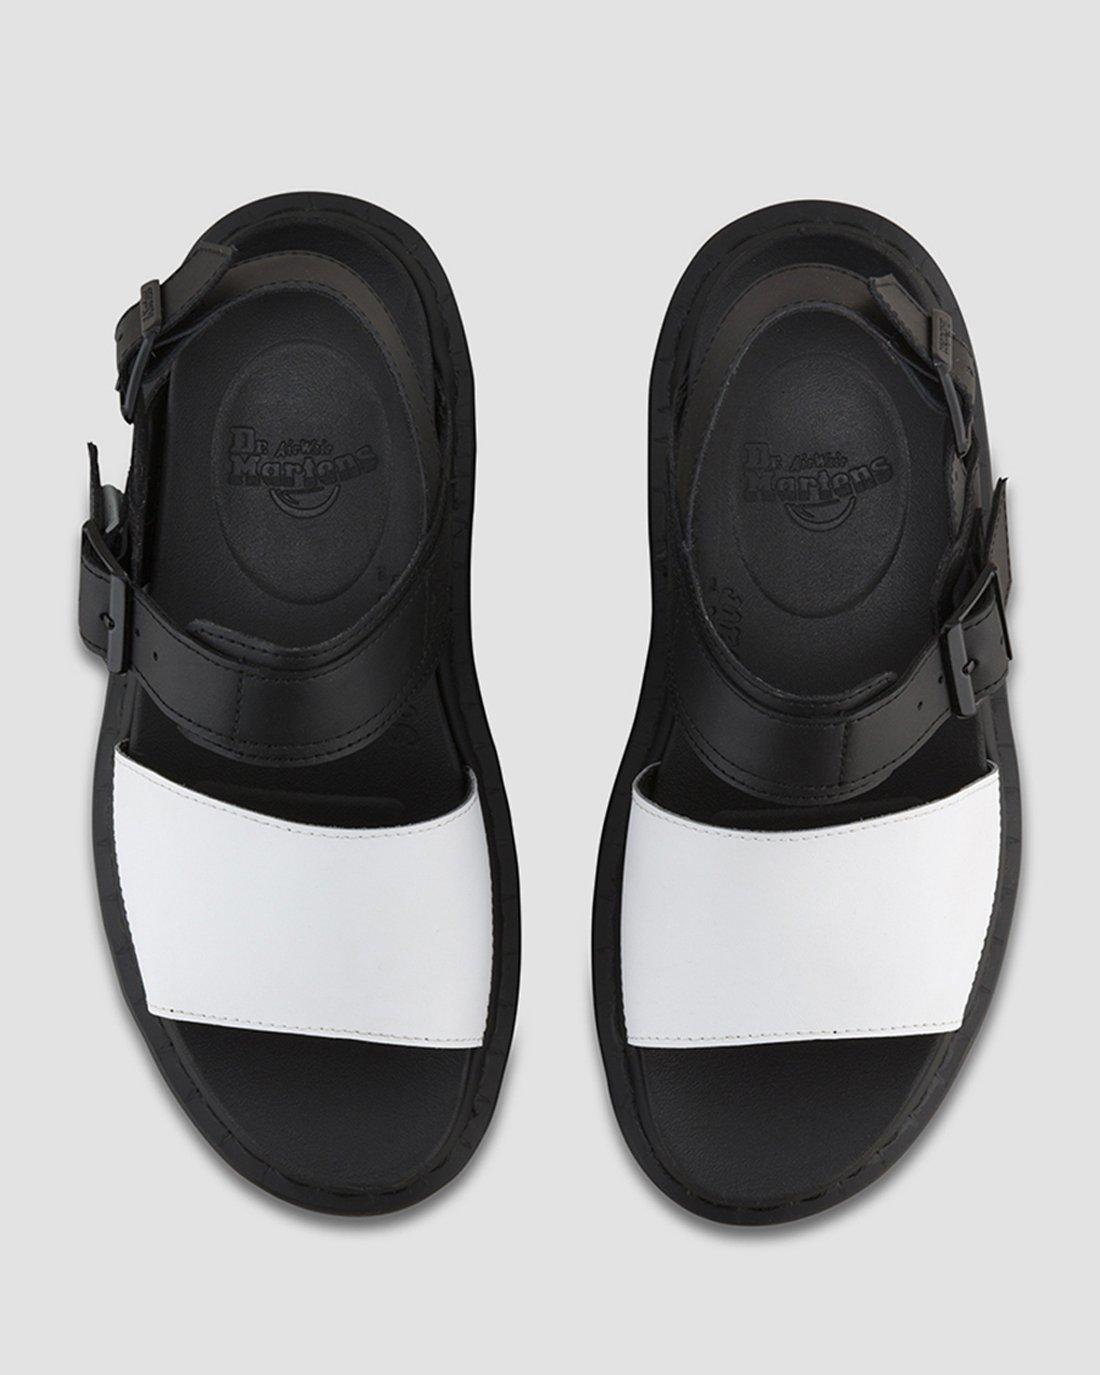 Voss Women's Leather Strap Sandals in Black+White